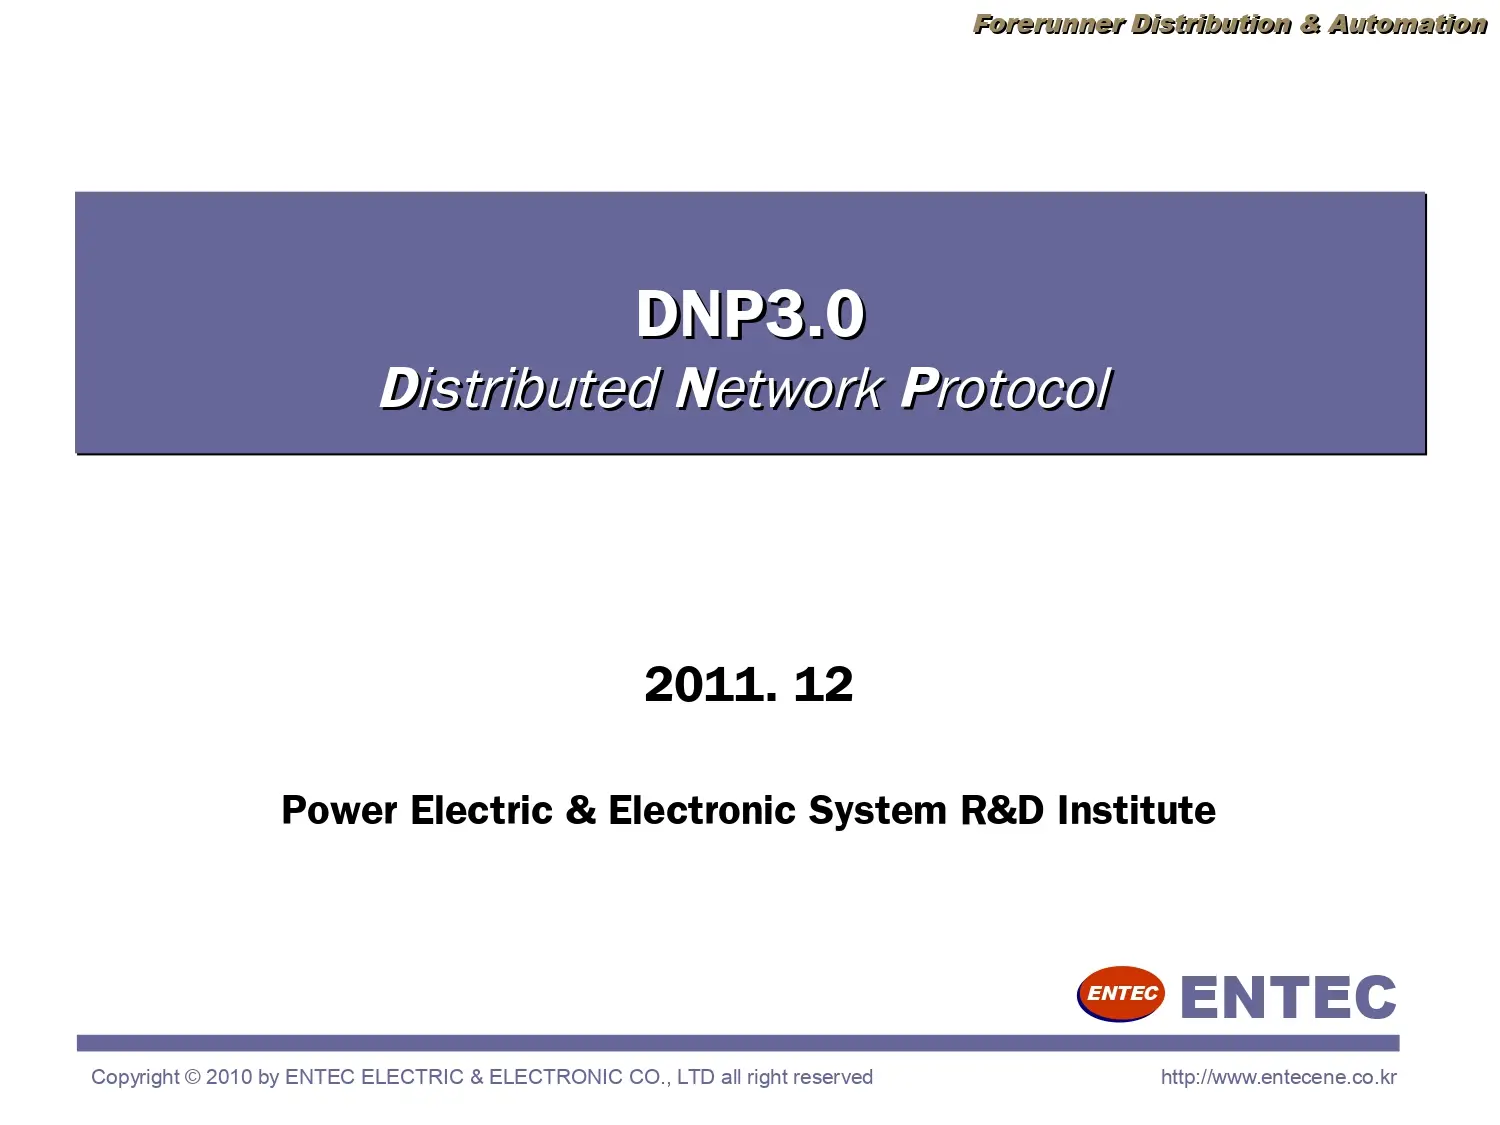 Distributed Network Protocol